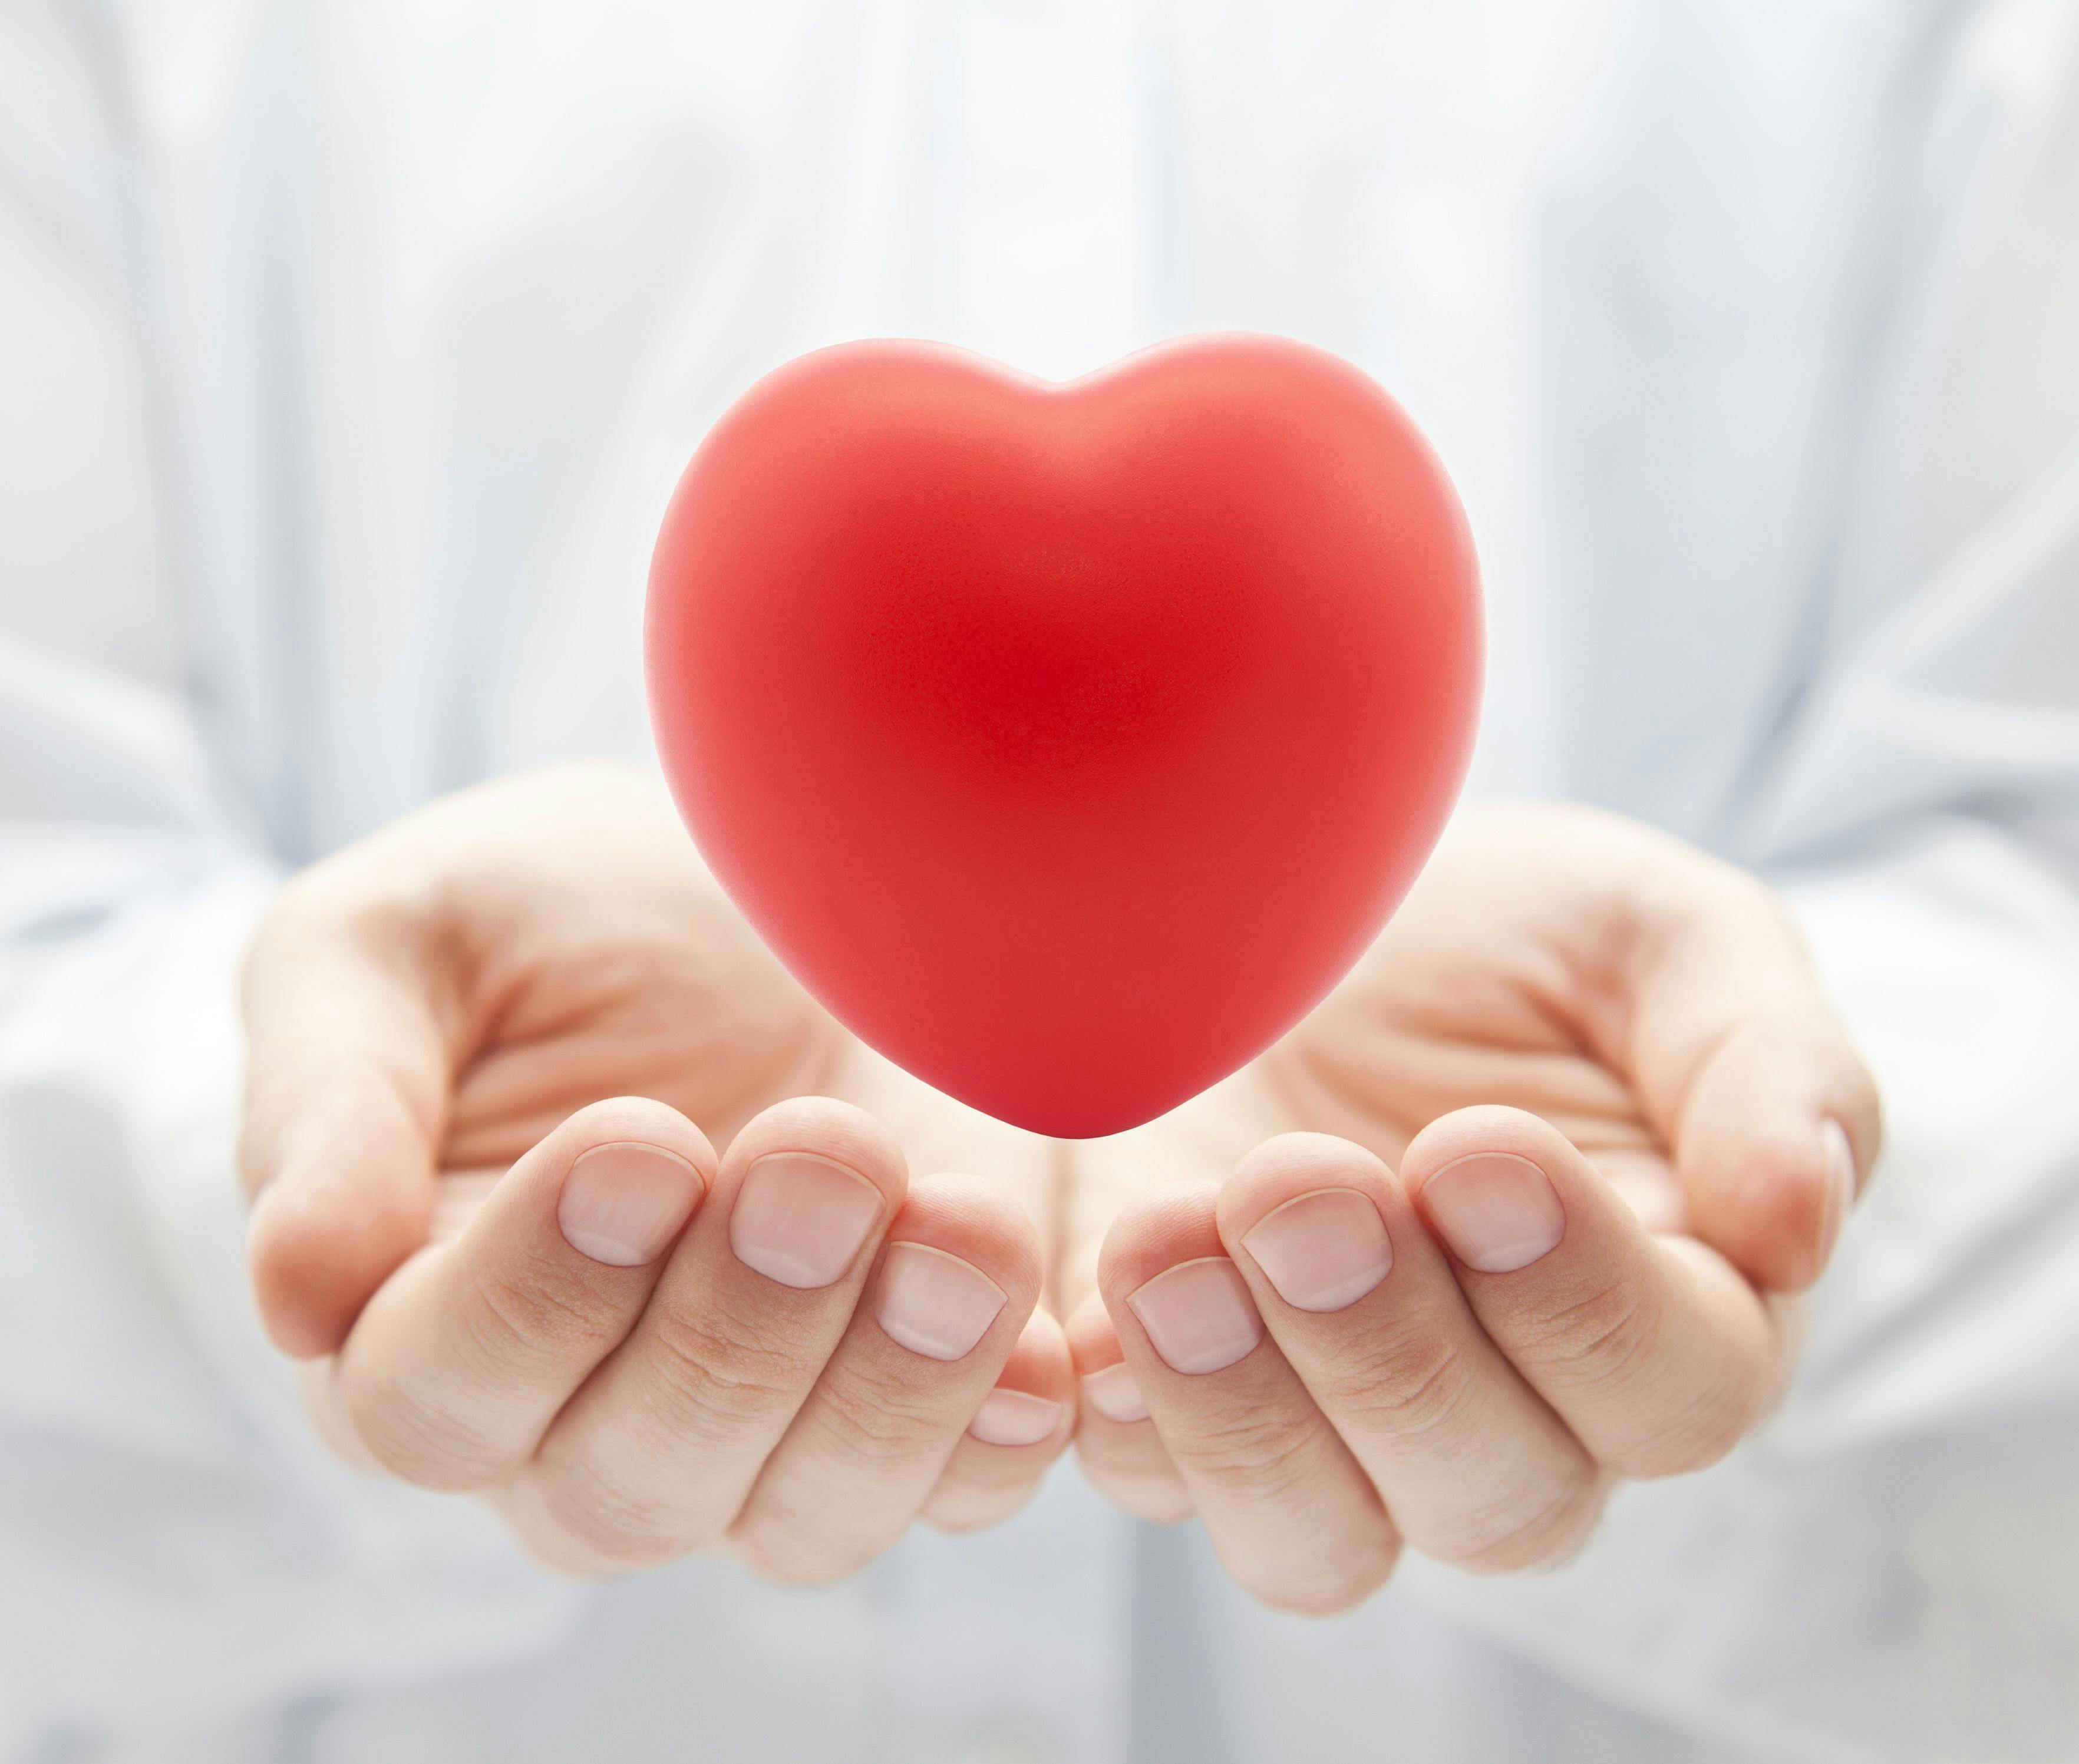 Stock image of a doctors holding a heart.